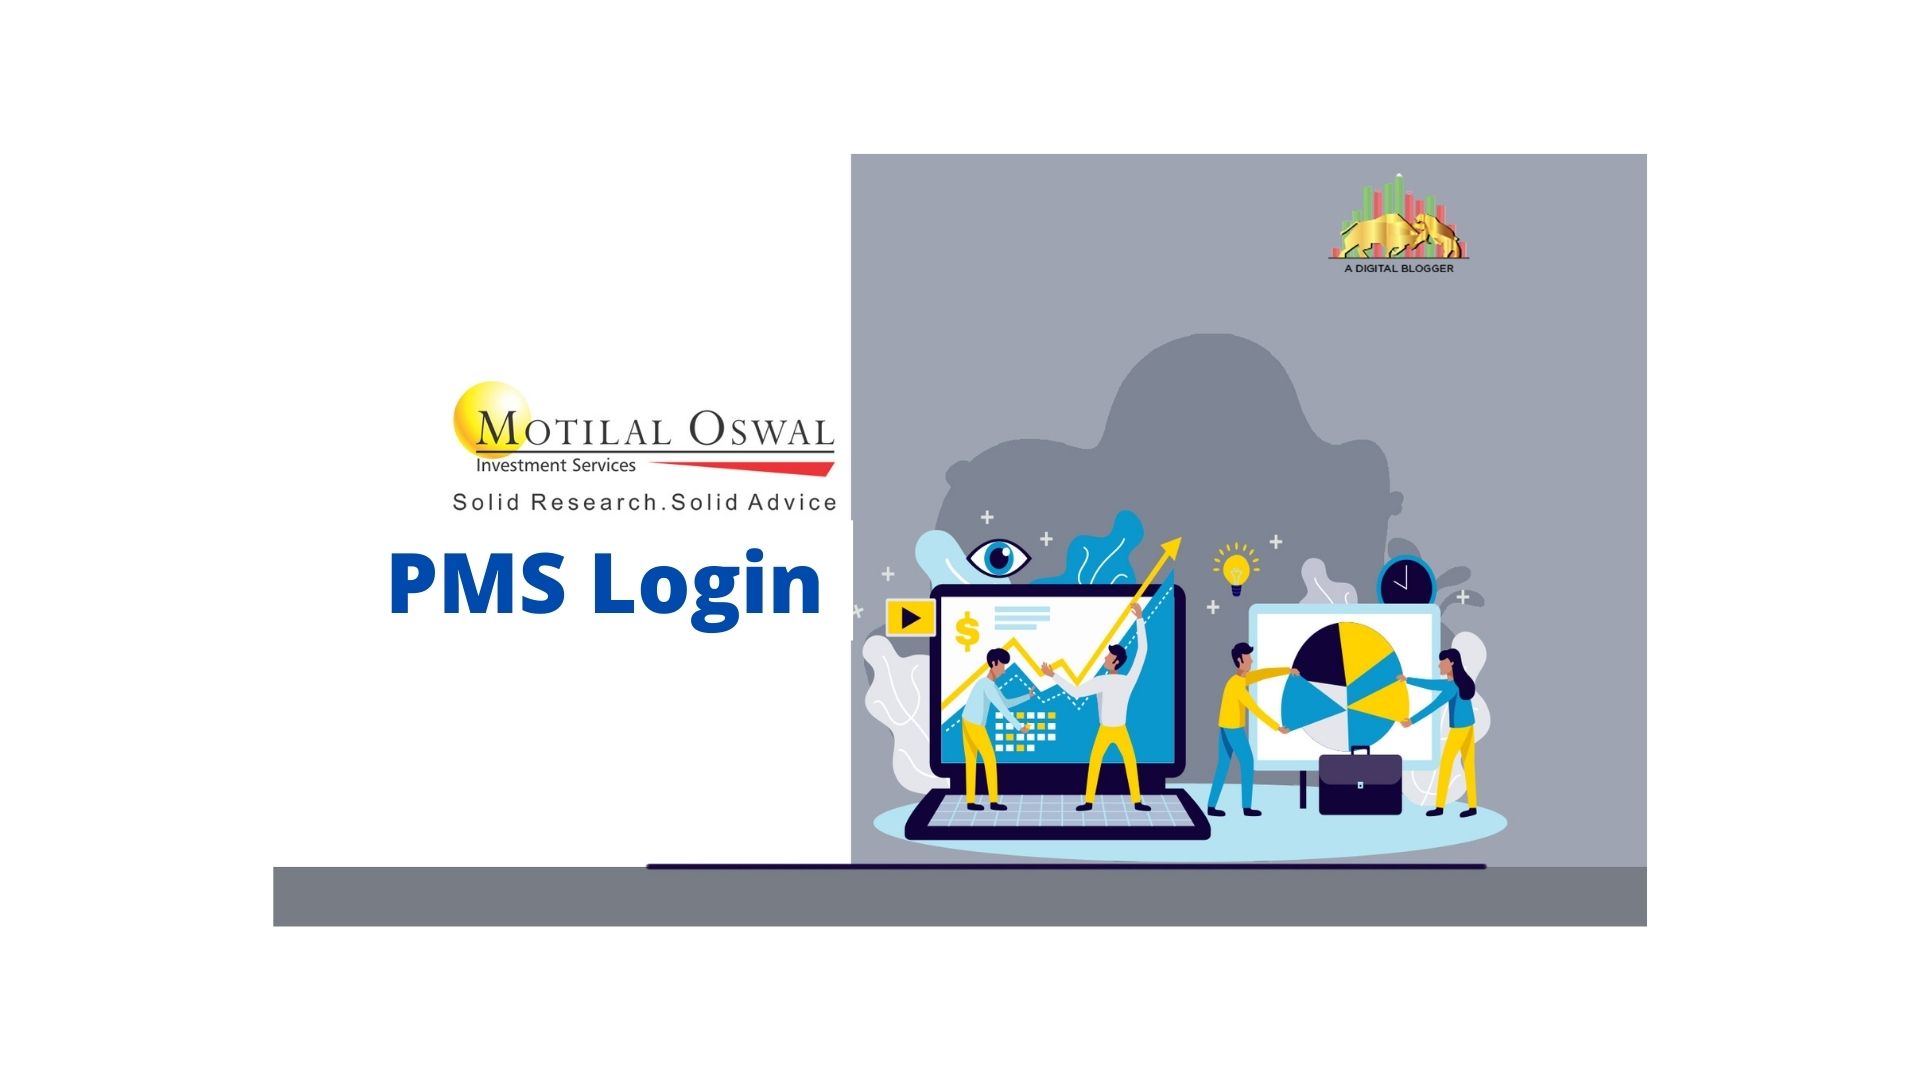 Motilal Oswal PMS Login | Online, Account, Client, Investor